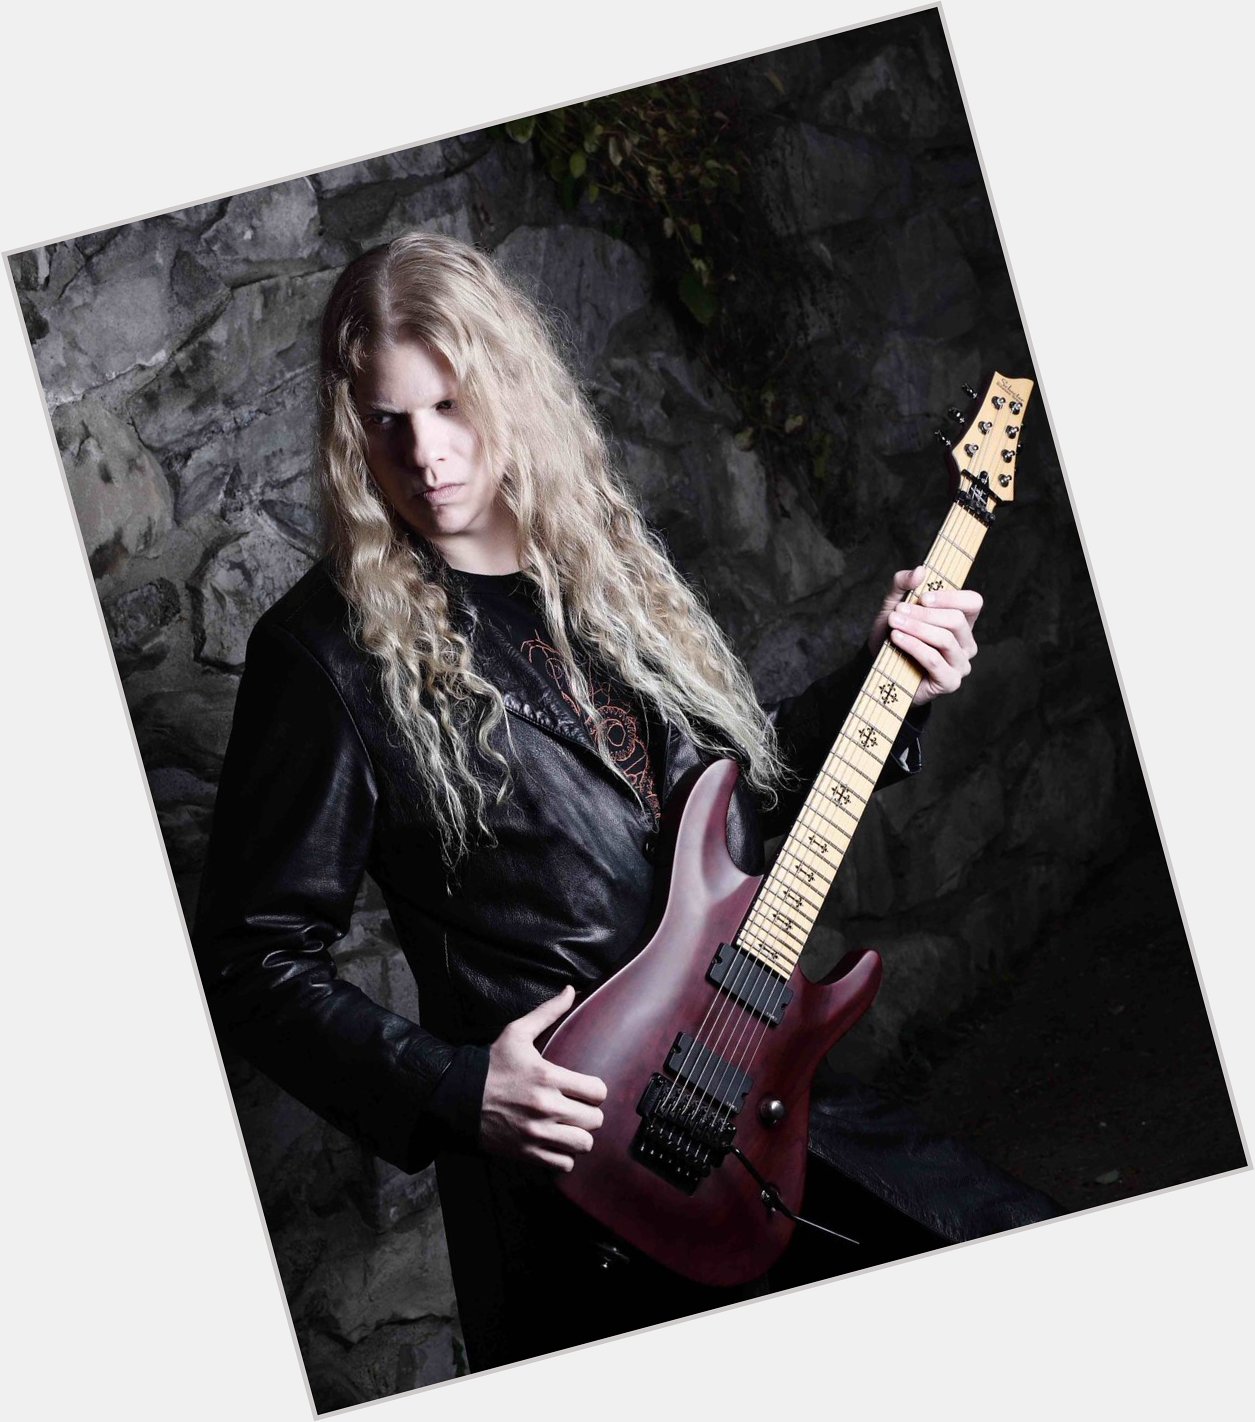 Today  \s guitar player, is turning 44! Happy bday from MH Italia and its readers! \\m/ 